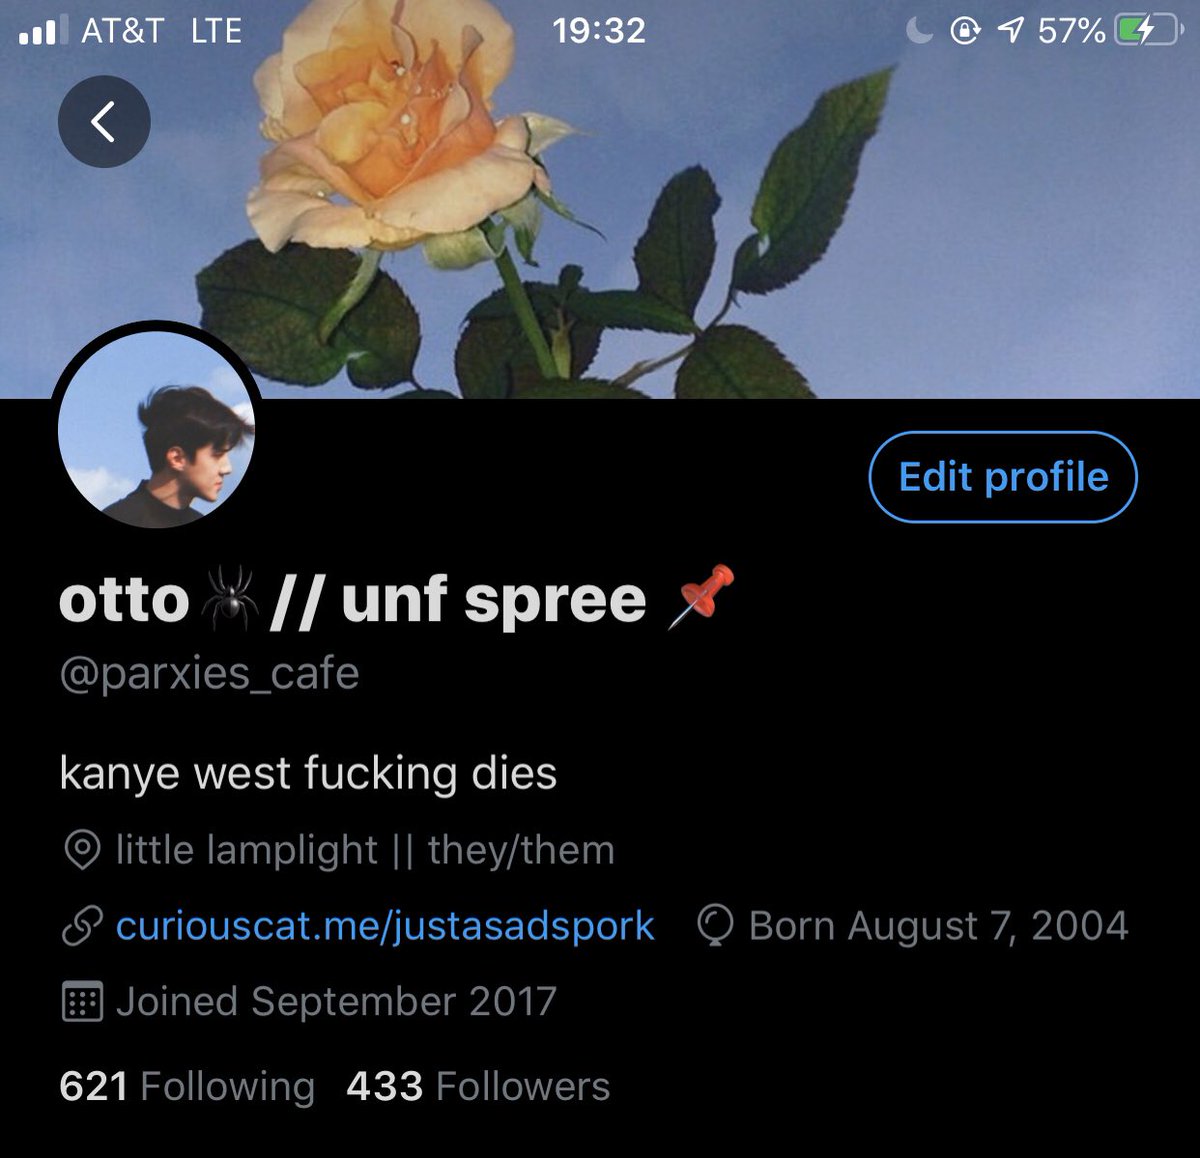 nvm that layout was uglee